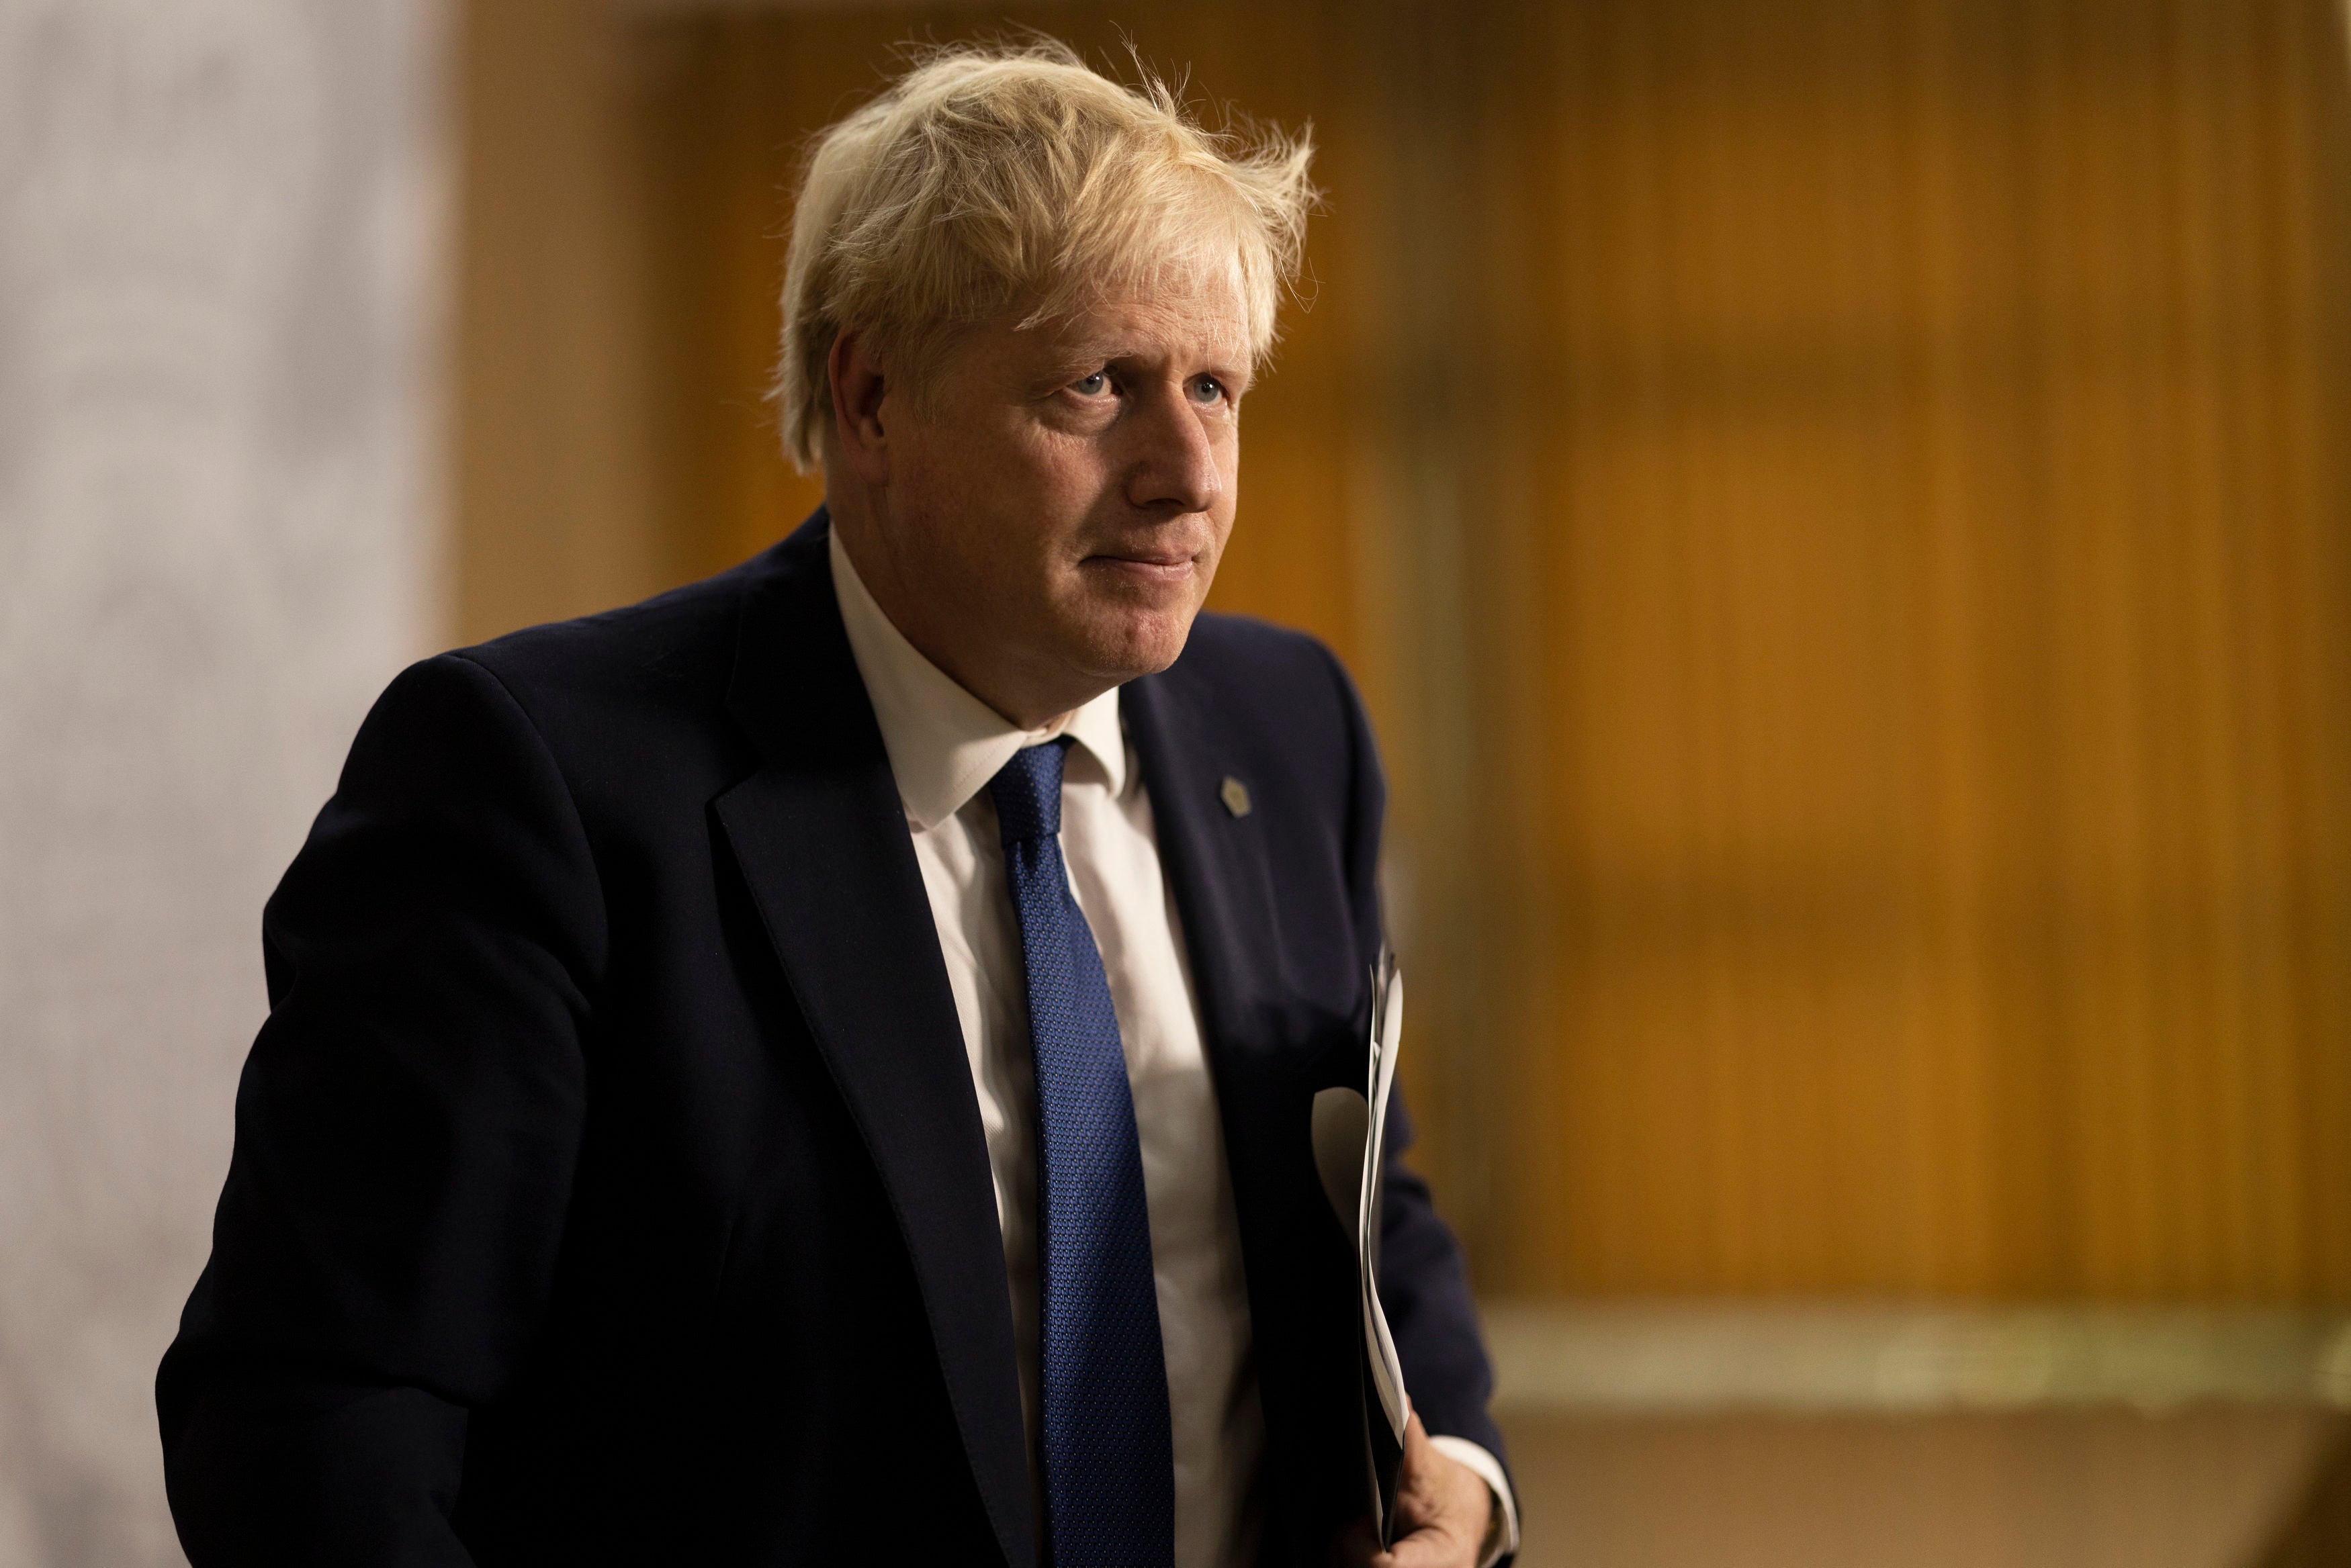 PM Boris Johnson at a press conference during the Commonwealth Heads of Government Meeting in Kigali, Rwanda